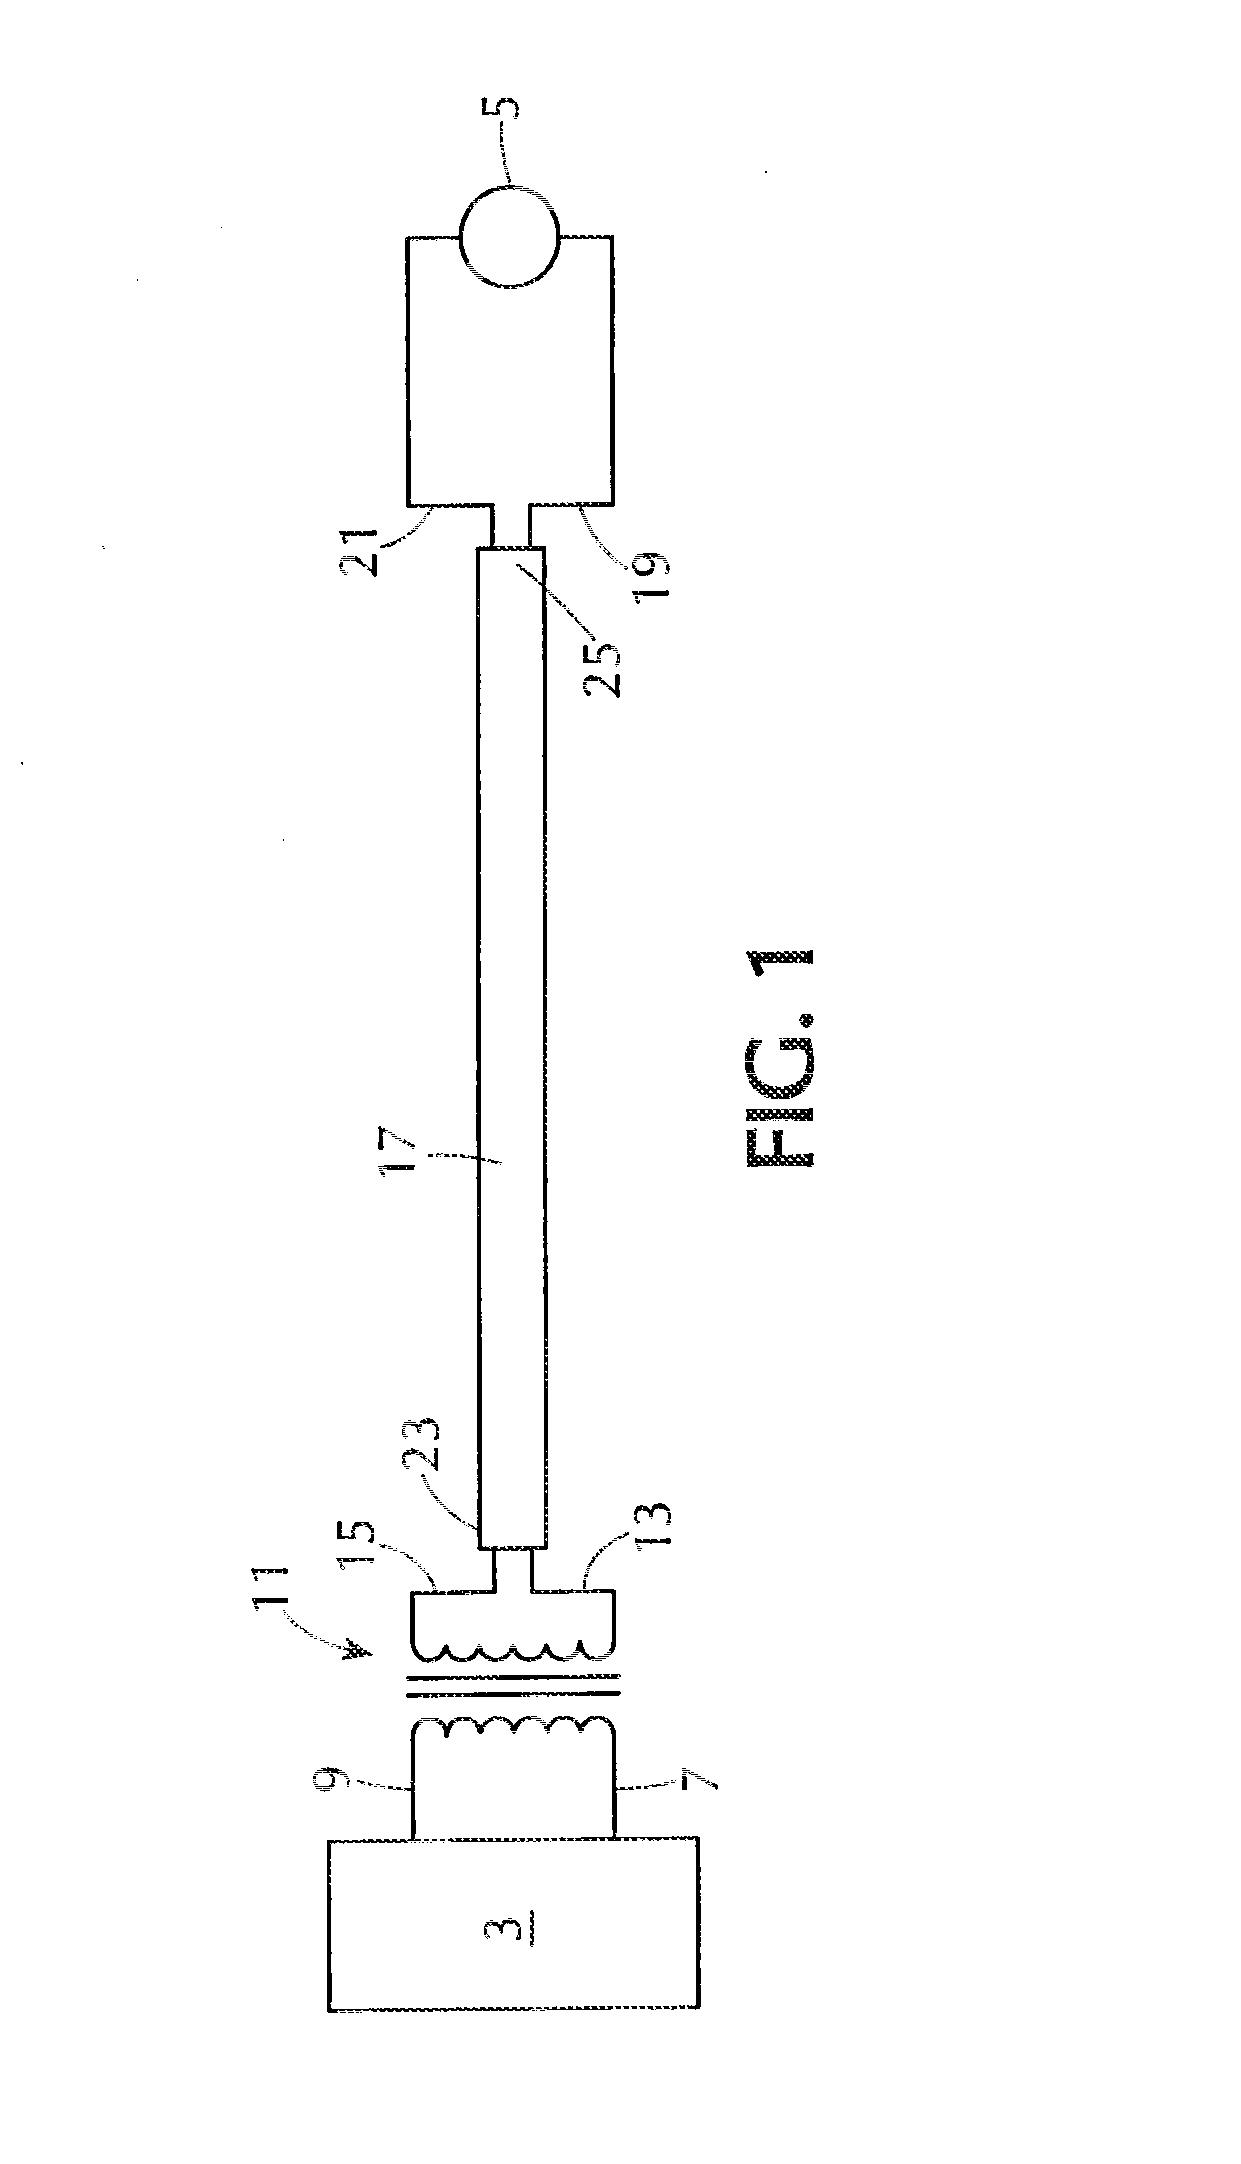 Electrical power transmission system and method